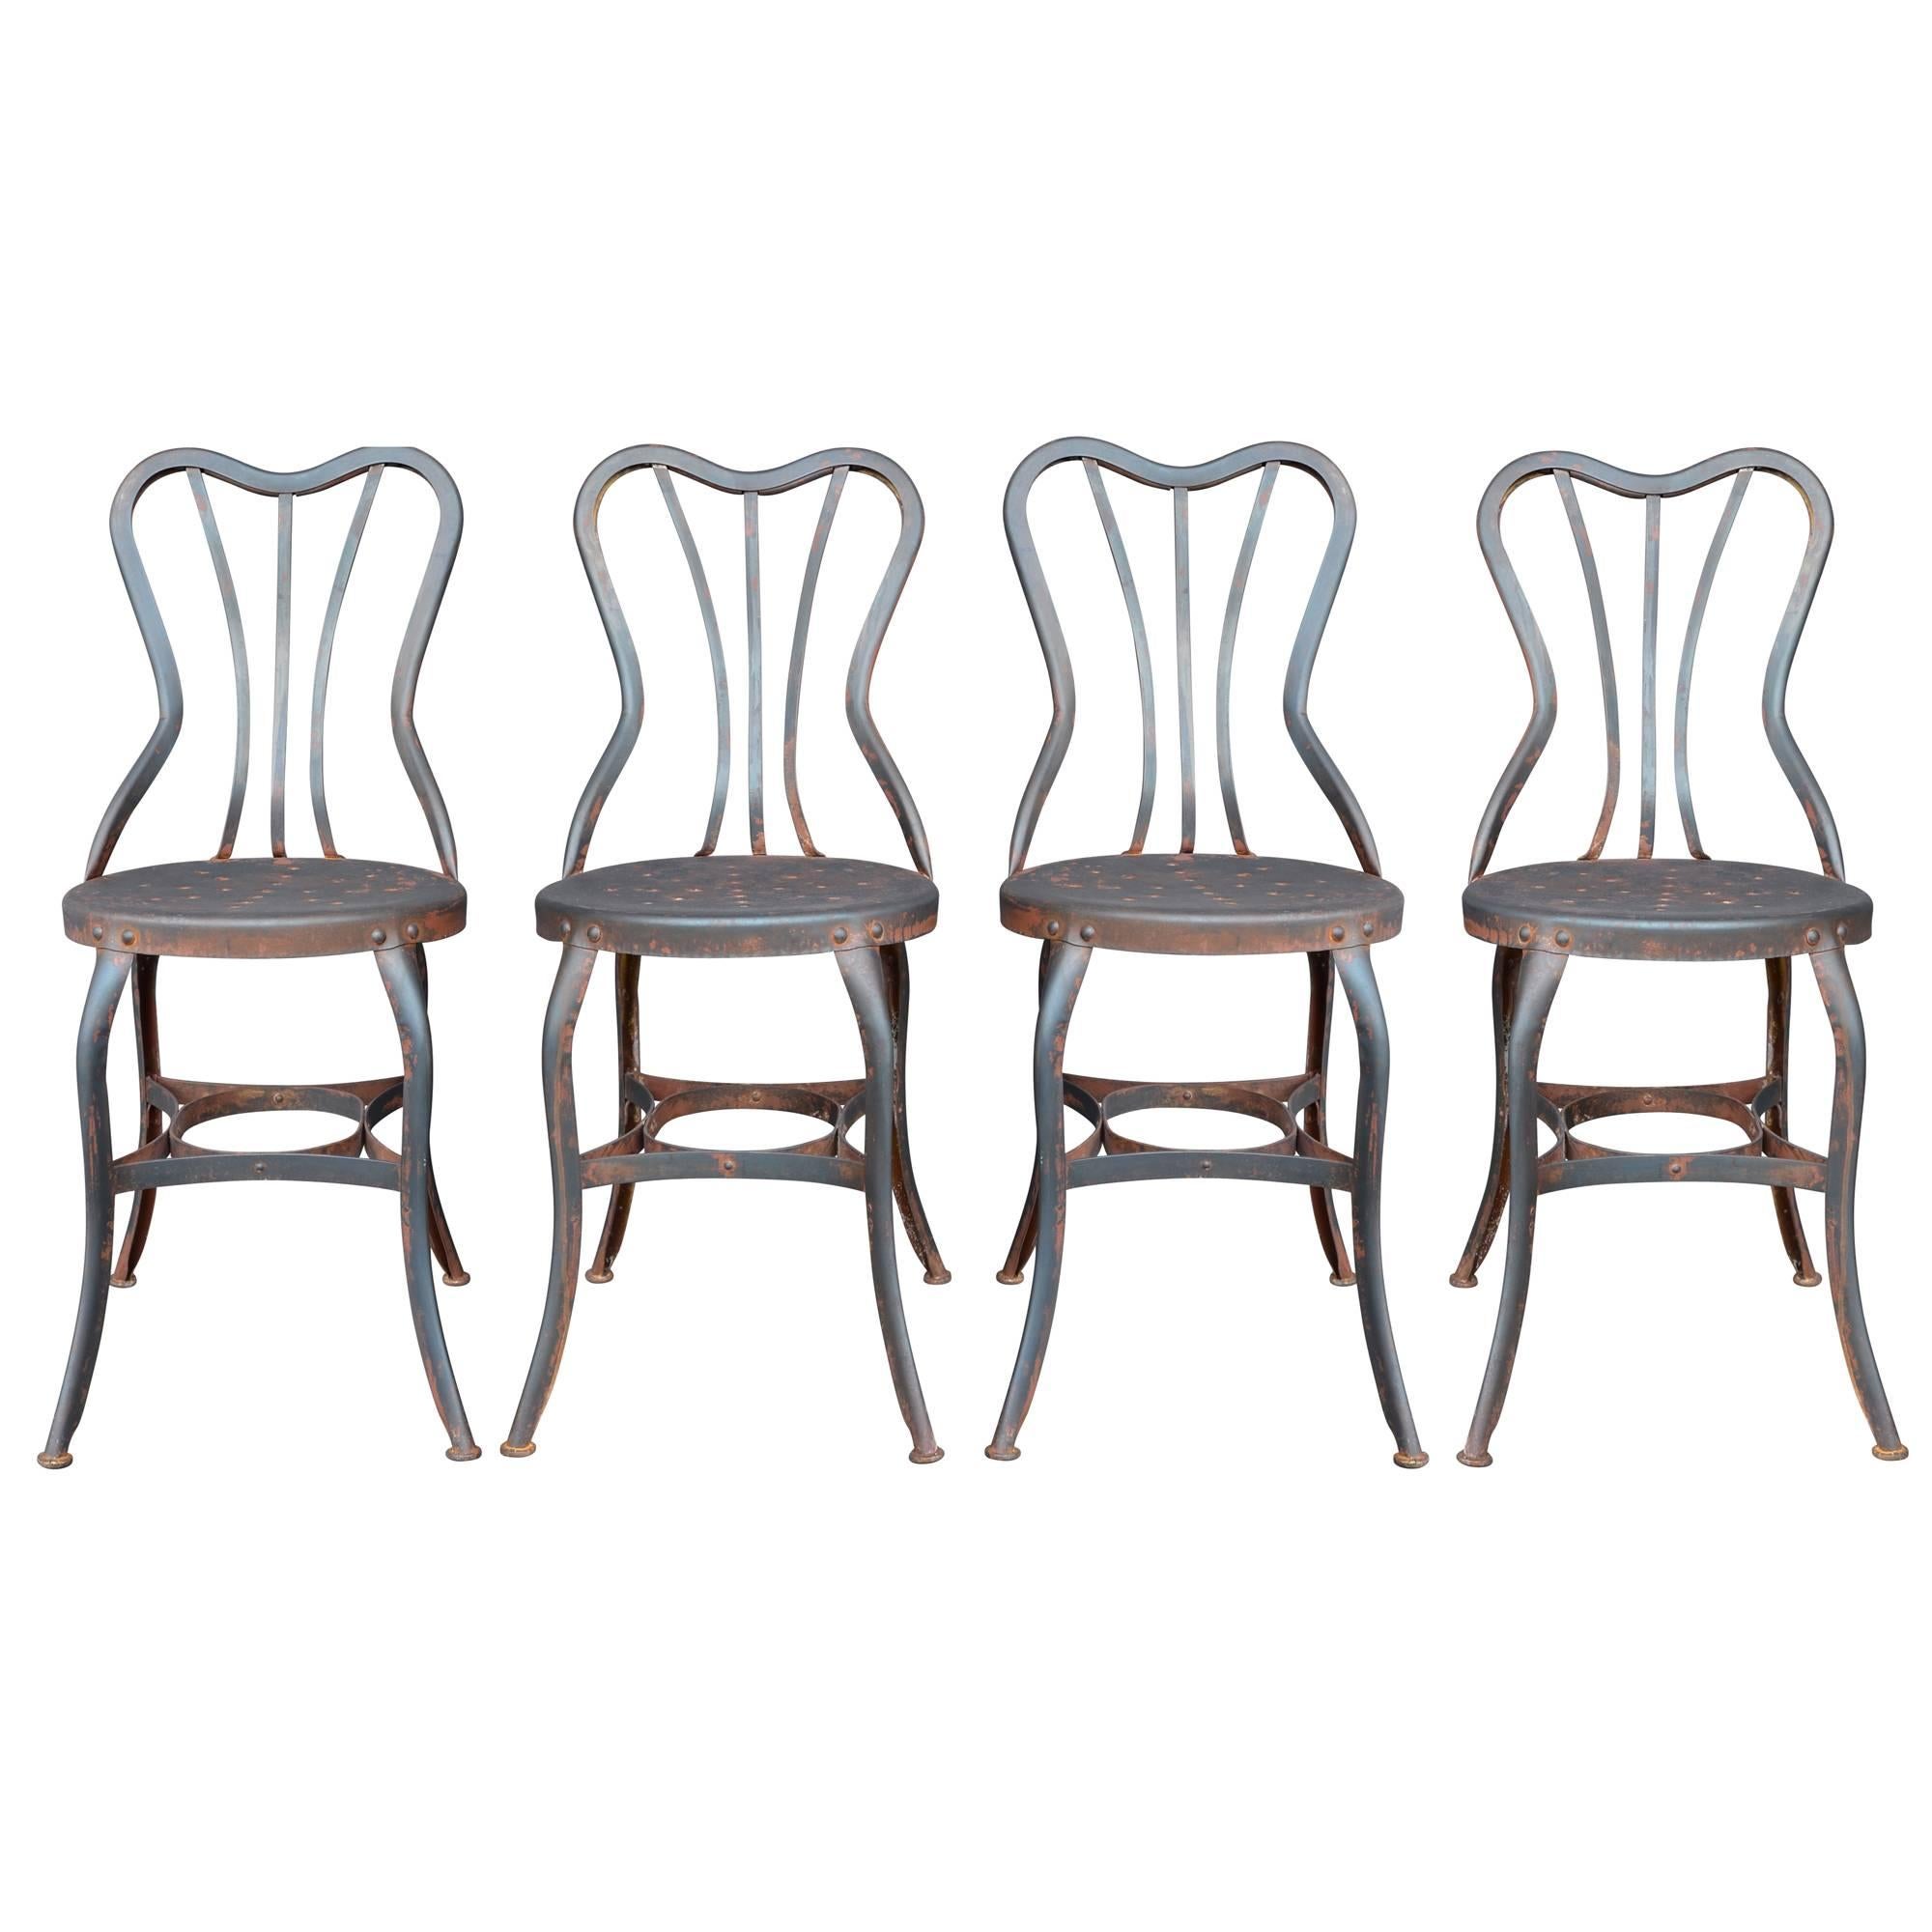 Set of Four Raw Steel Toledo Cafe Chairs, circa 1930